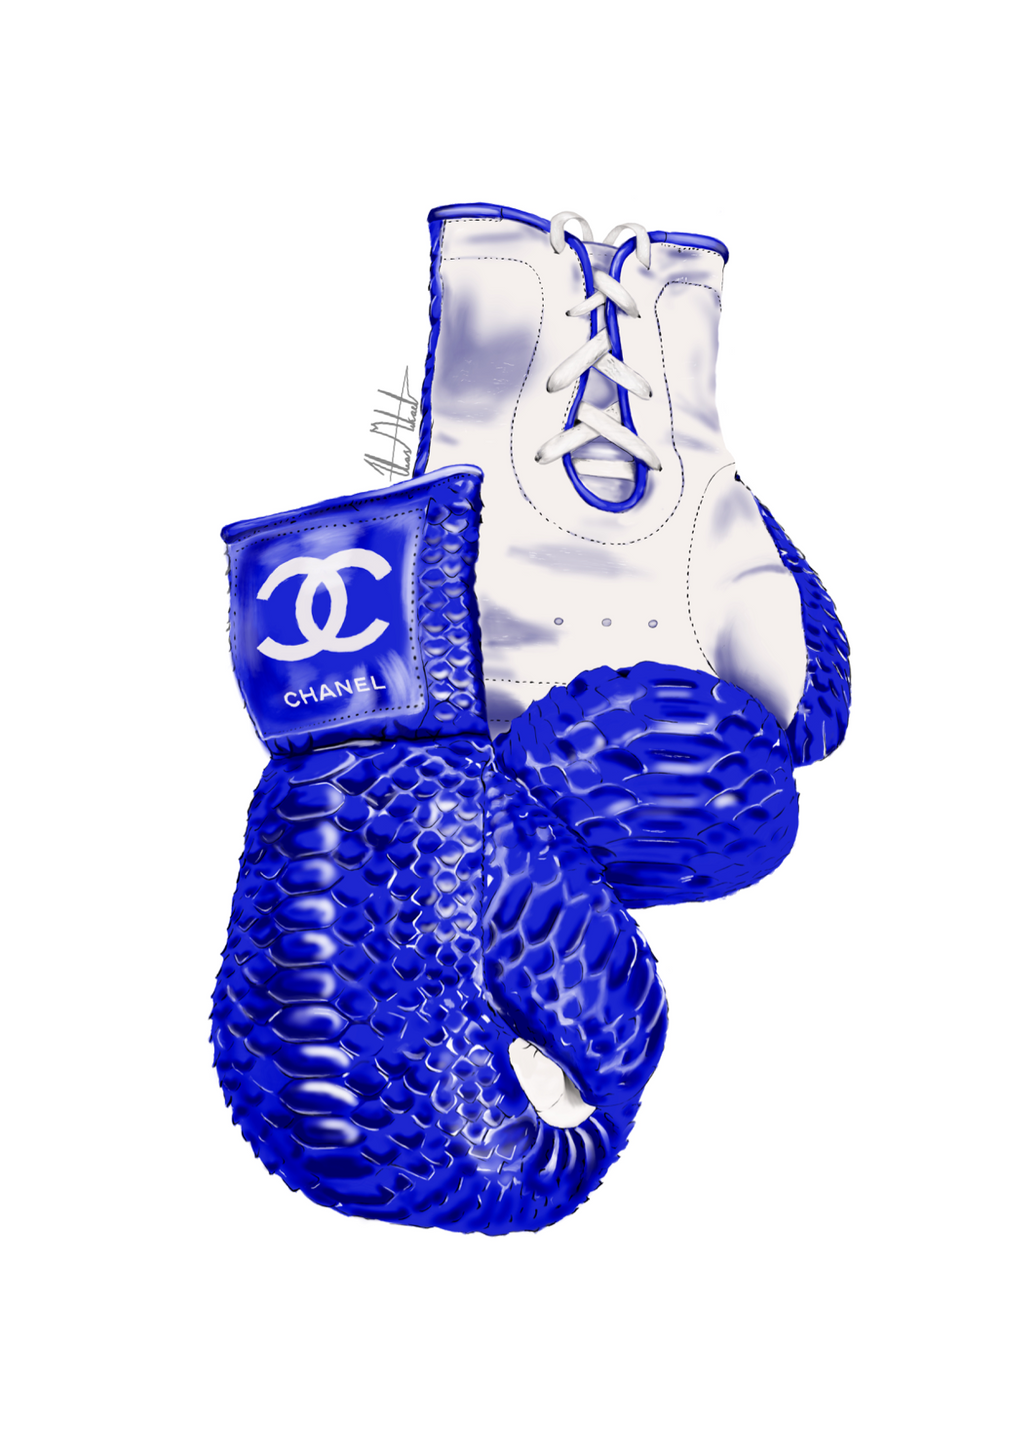 CHANEL BLUE BOXING GLOVES